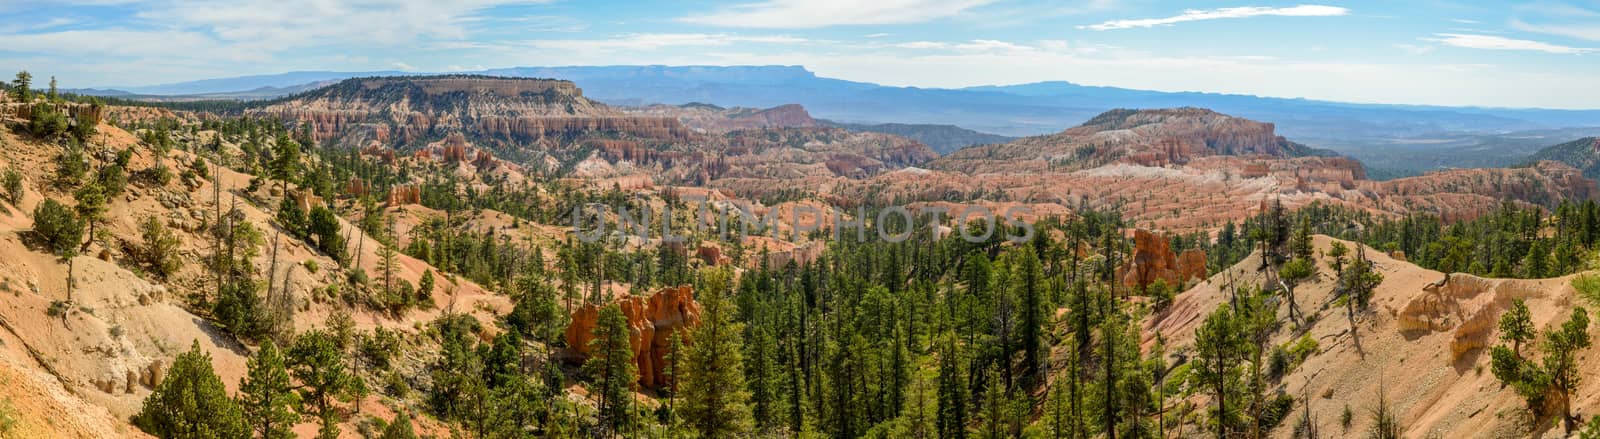 Panorama from Sunrise Point of Bryce Canyon National Park, Utah by Njean